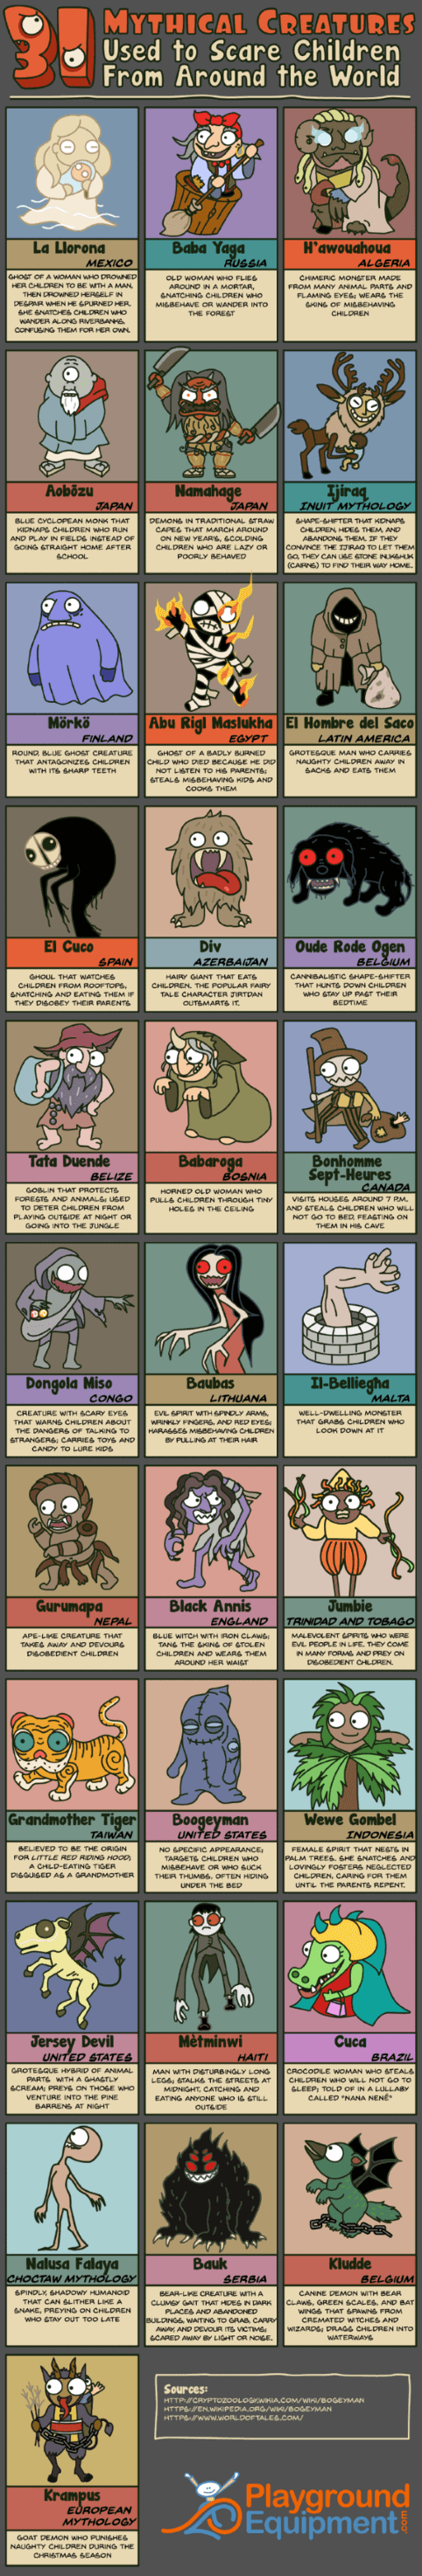 Evil-Parental-Weapon-Mythical-Creatures-that-Trouble-Naughty-Children-Infographic